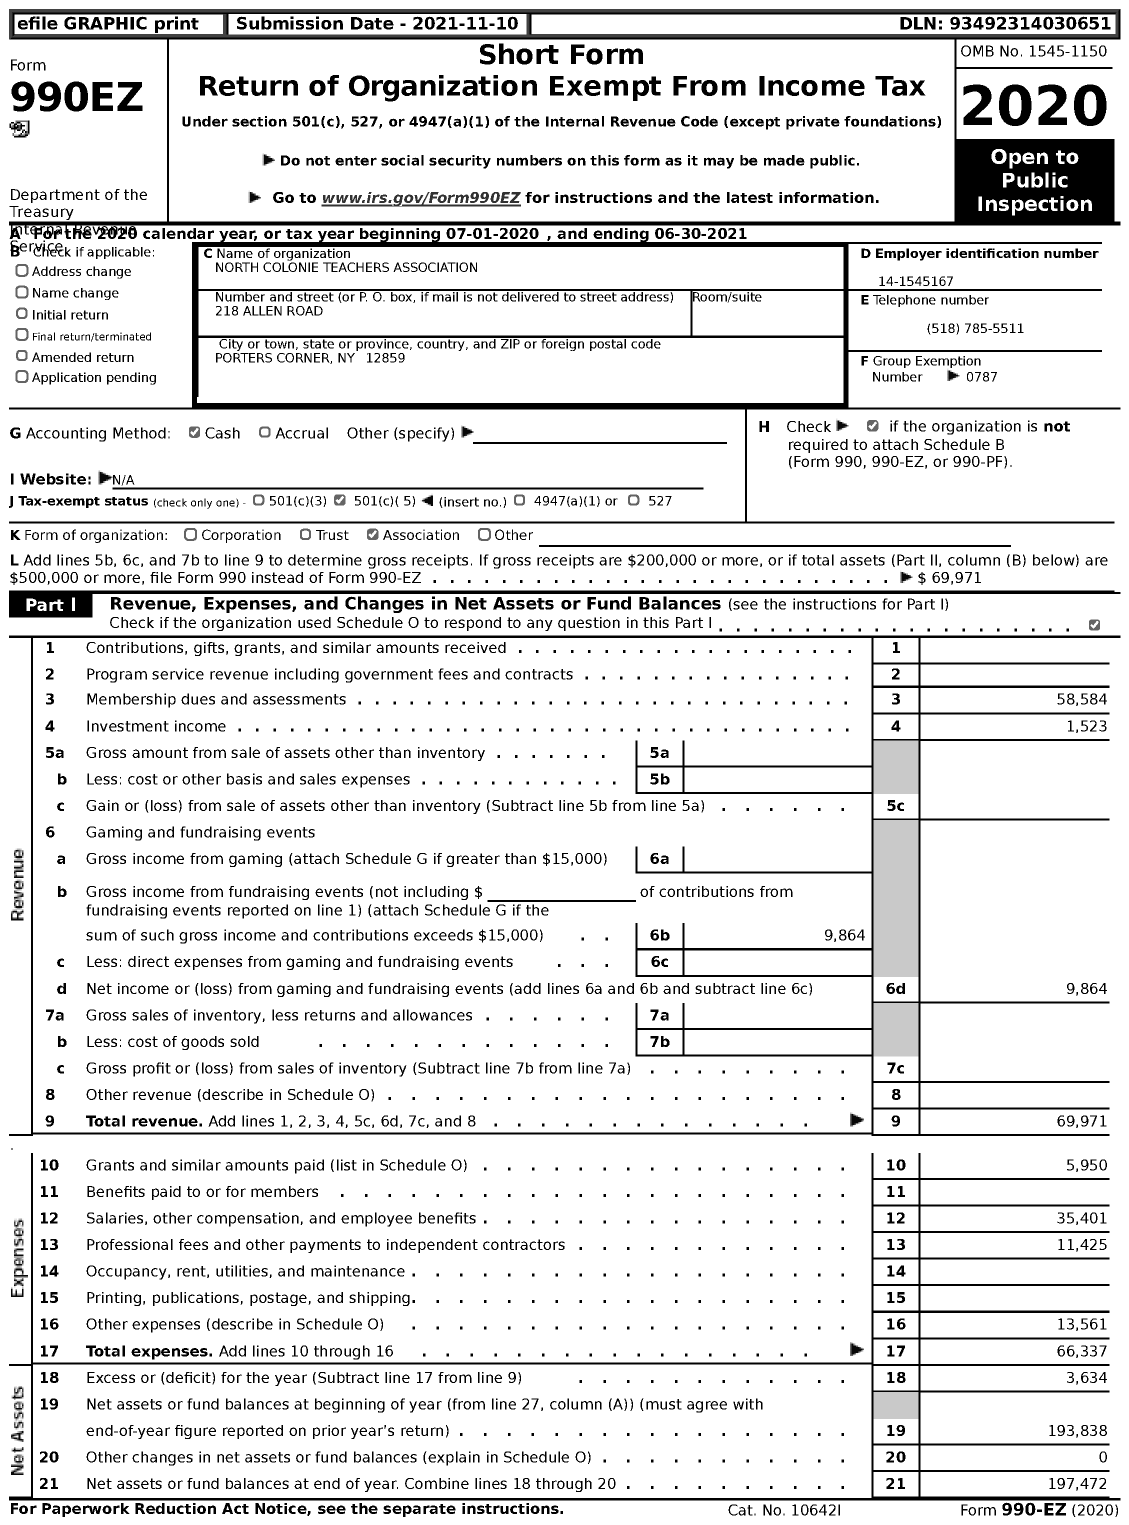 Image of first page of 2020 Form 990EZ for American Federation of Teachers - 2875 North Colonie Teachers Associa